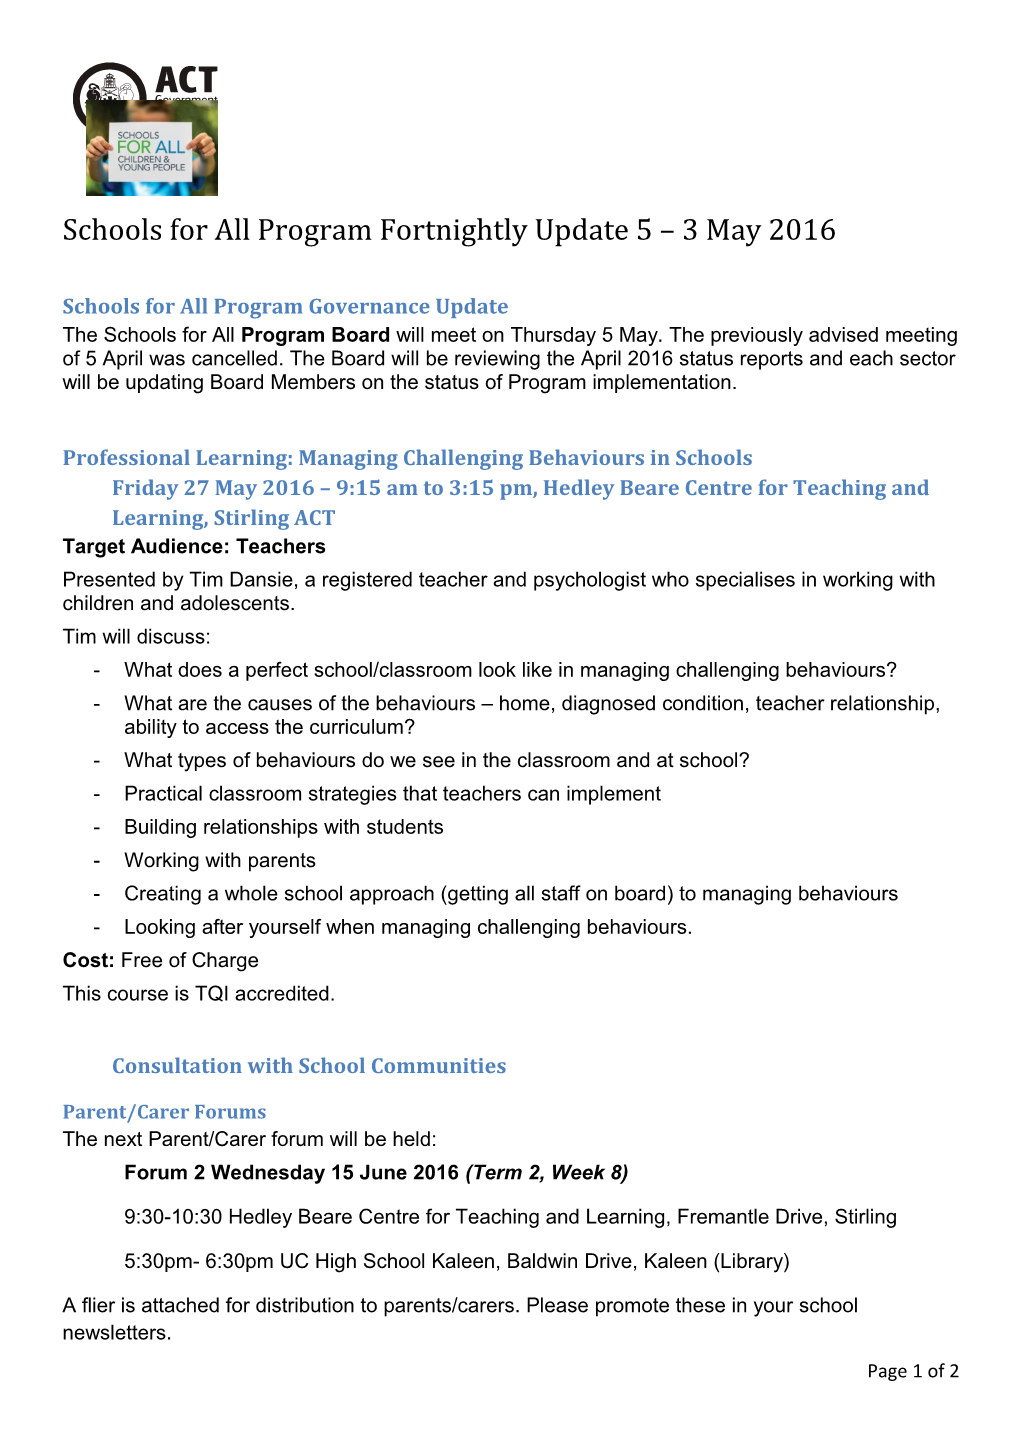 Schools for All Program Fortnightly Update 5 3 May 2016